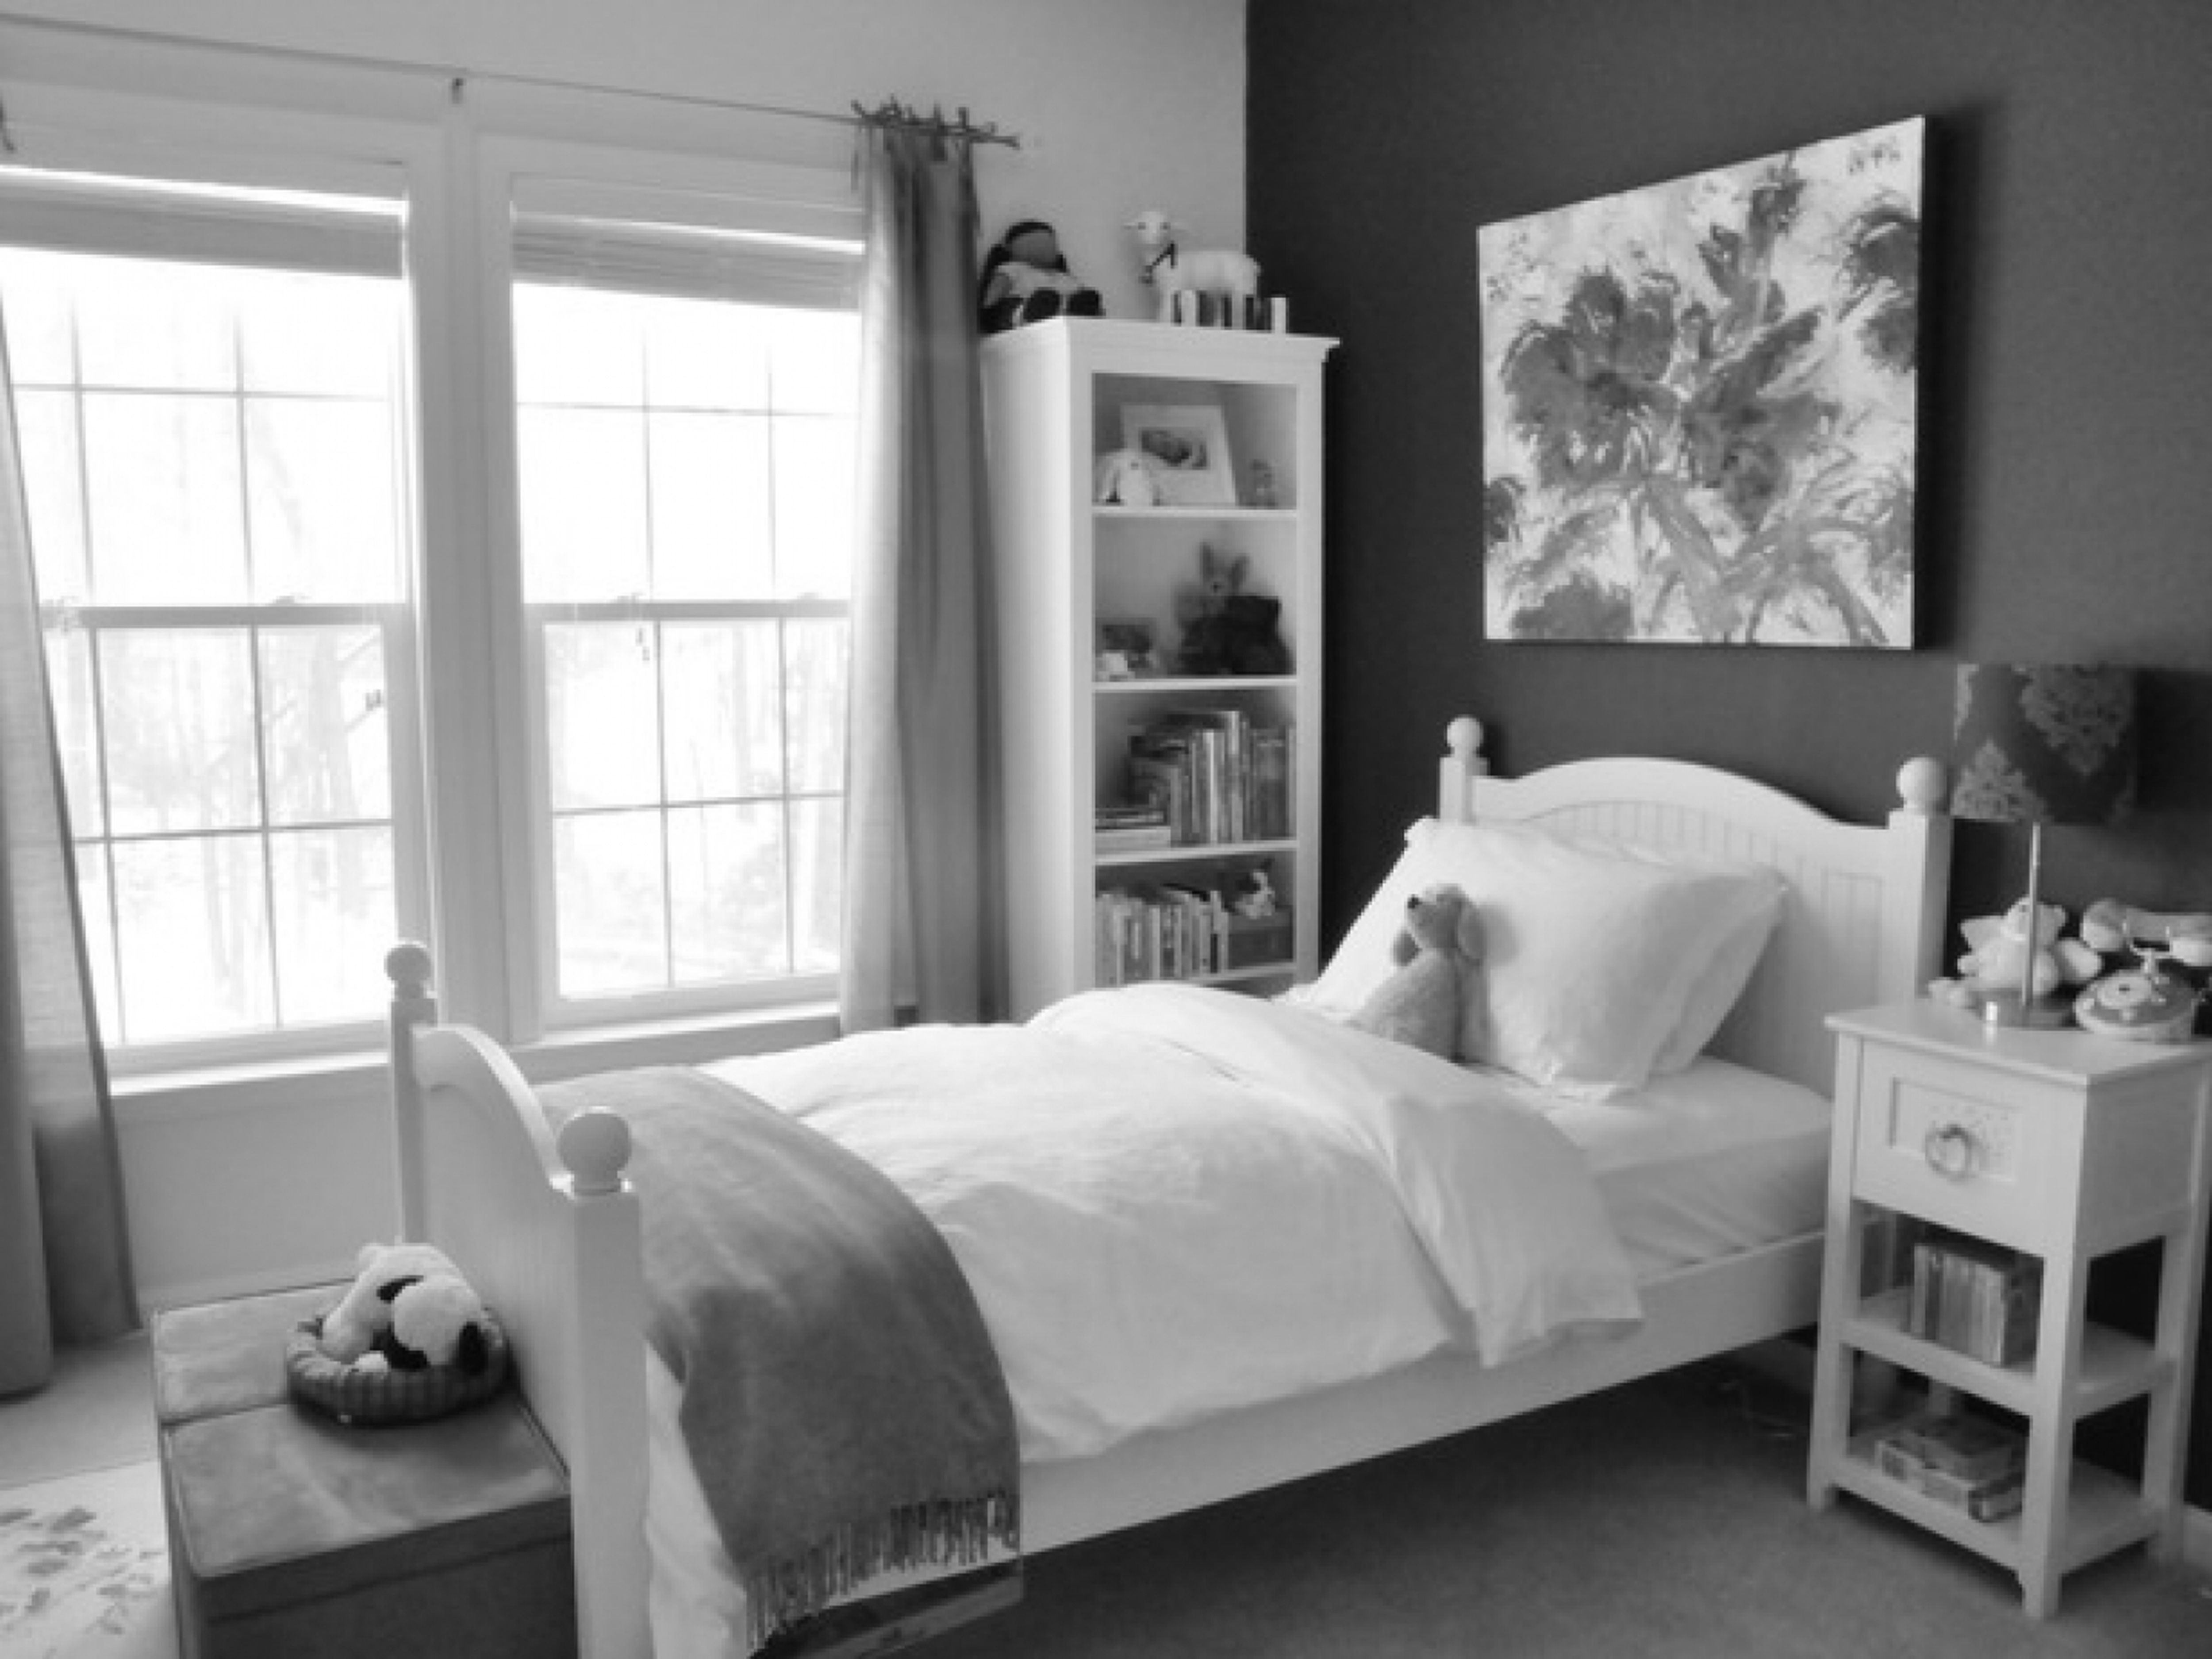 Young adult bedroom decorating ideas